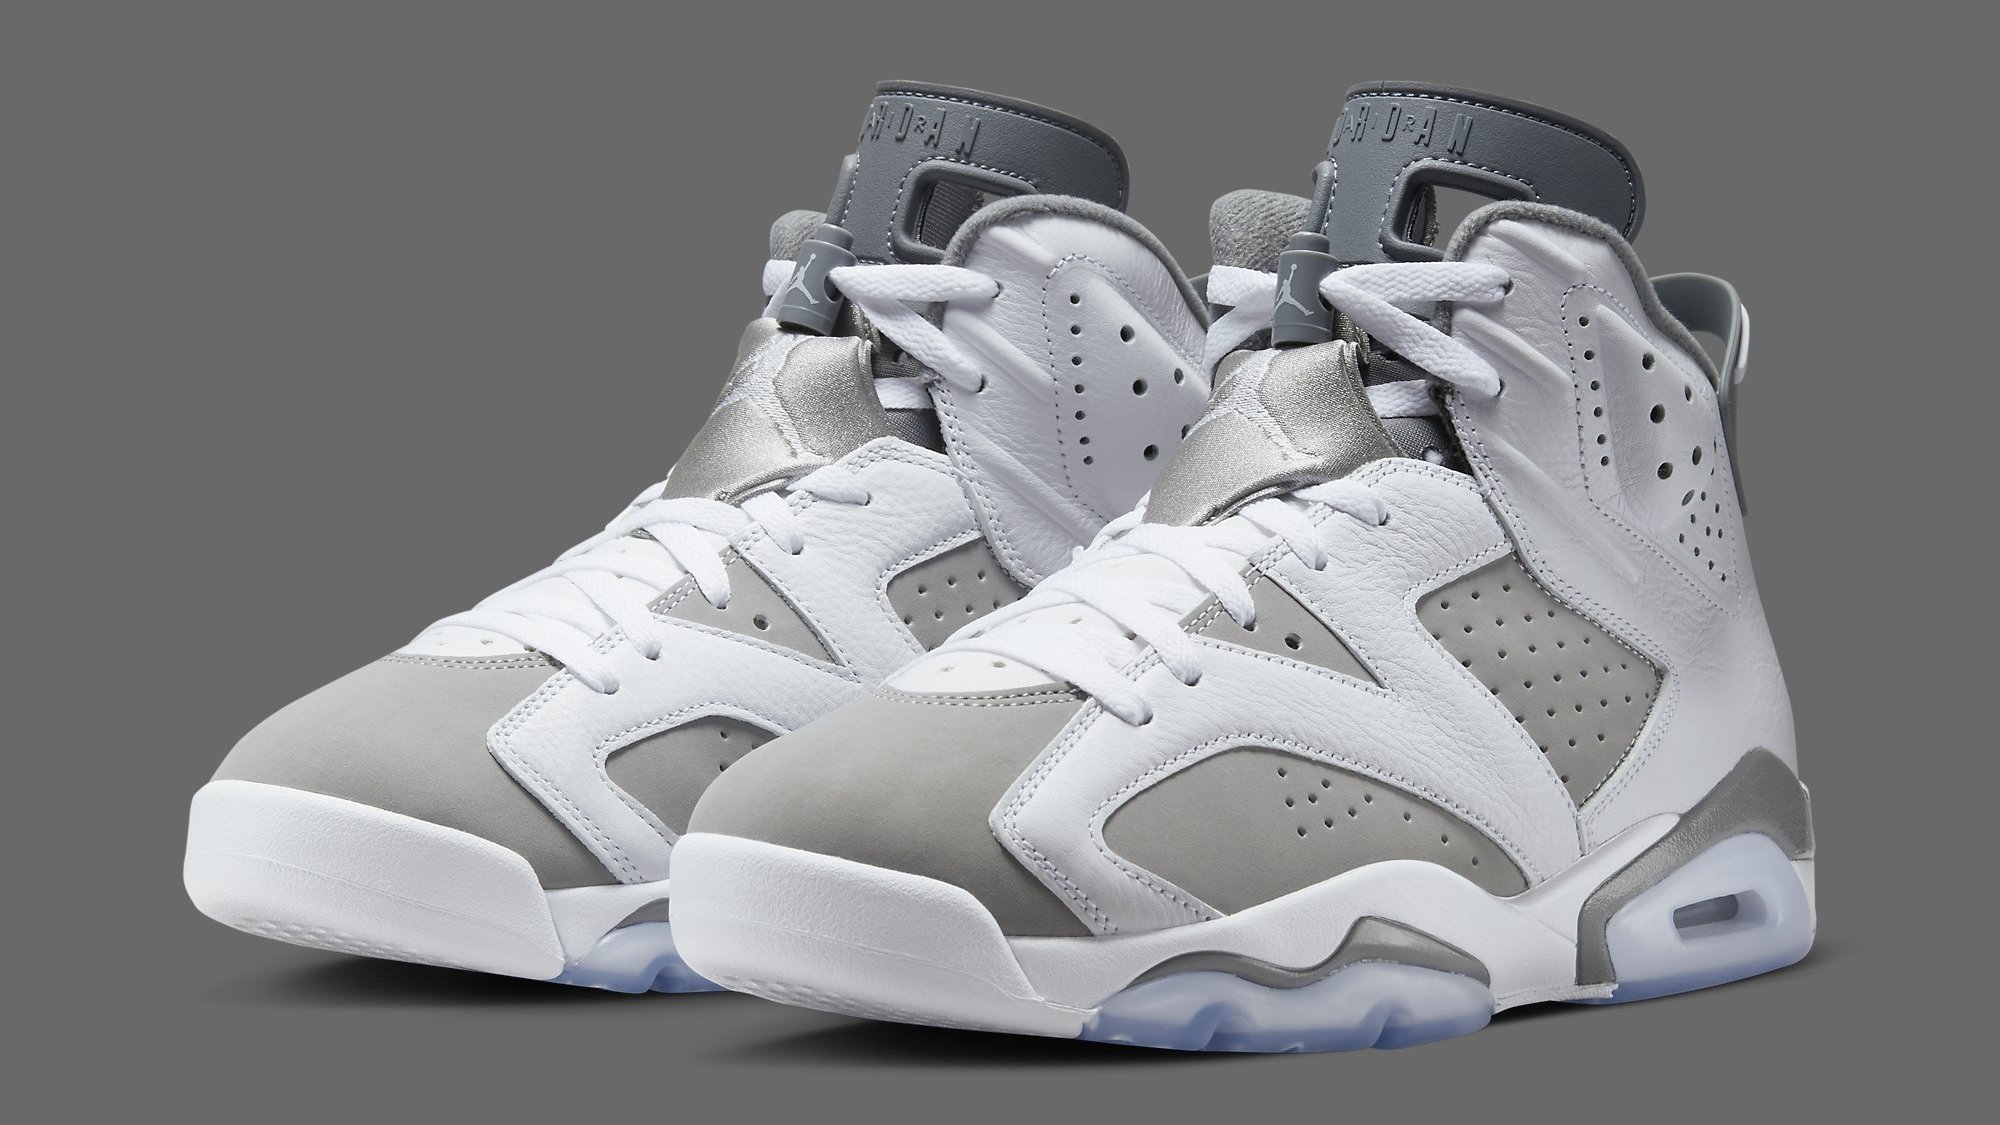 grey jordans that just came out